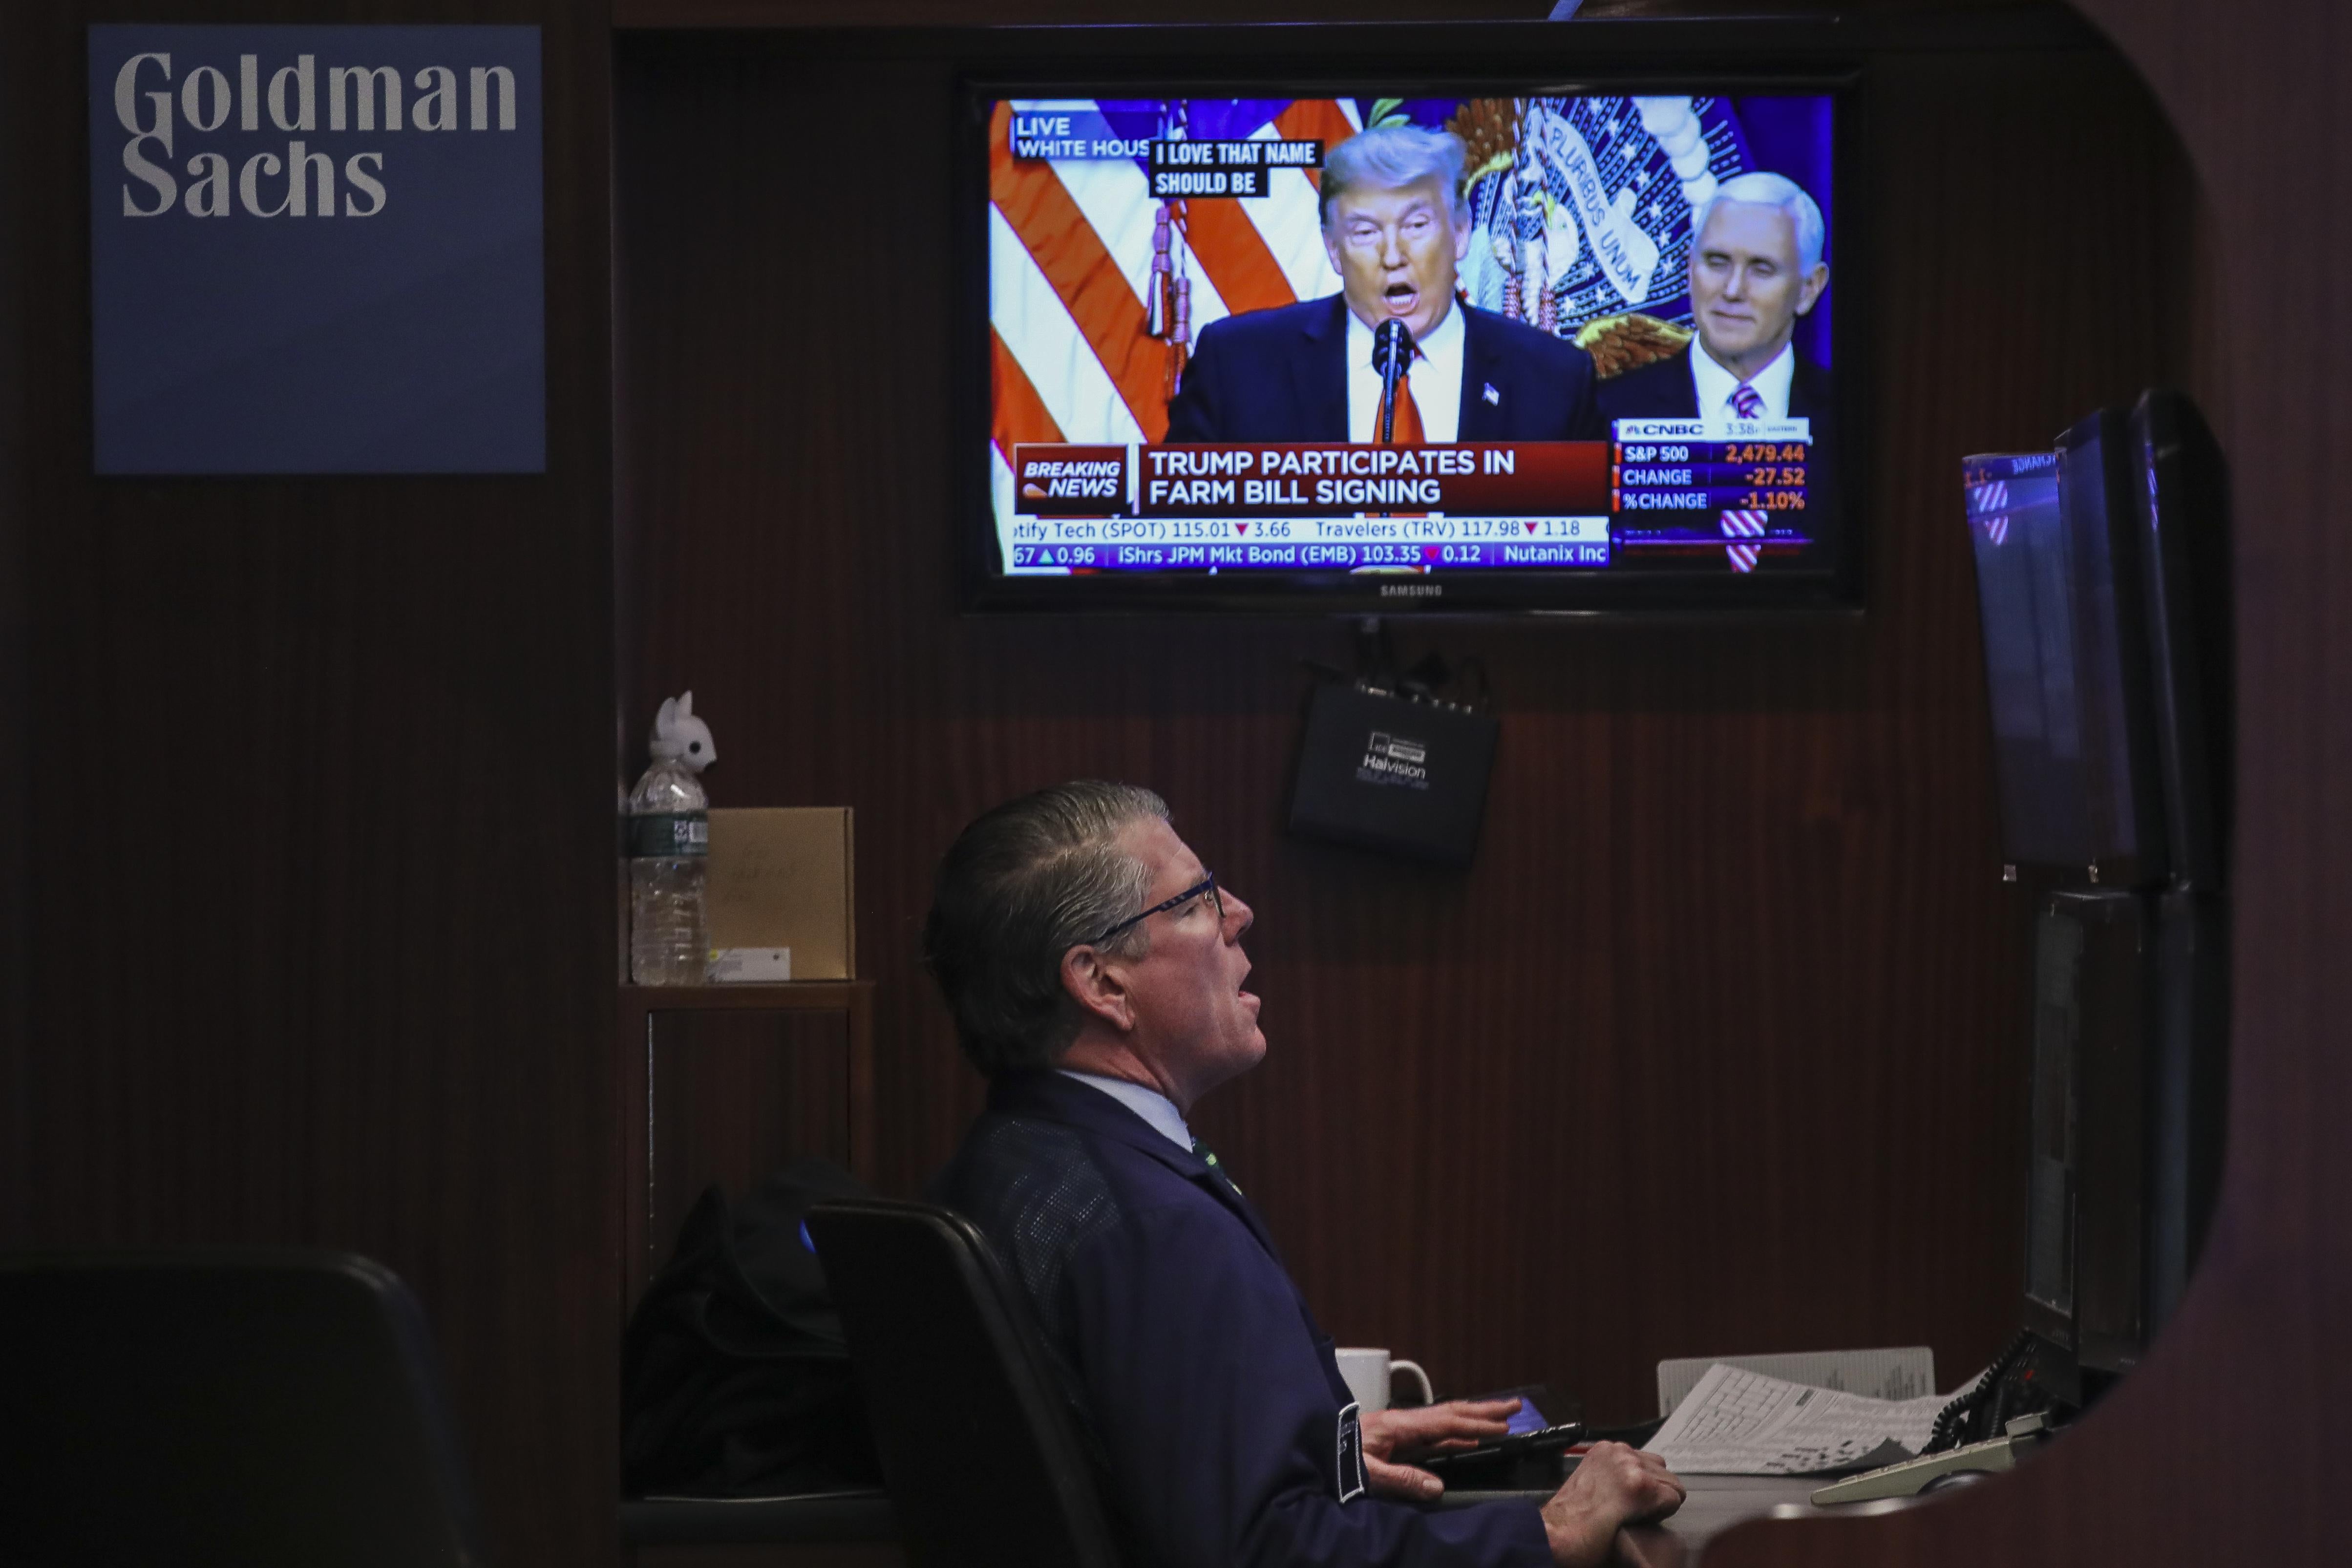 President Donald Trump is displayed on a monitor as a trader works at his desk ahead of the closing bell on the floor to he New York Stock Exchange (NYSE) on December 20, 2018 in New York City.